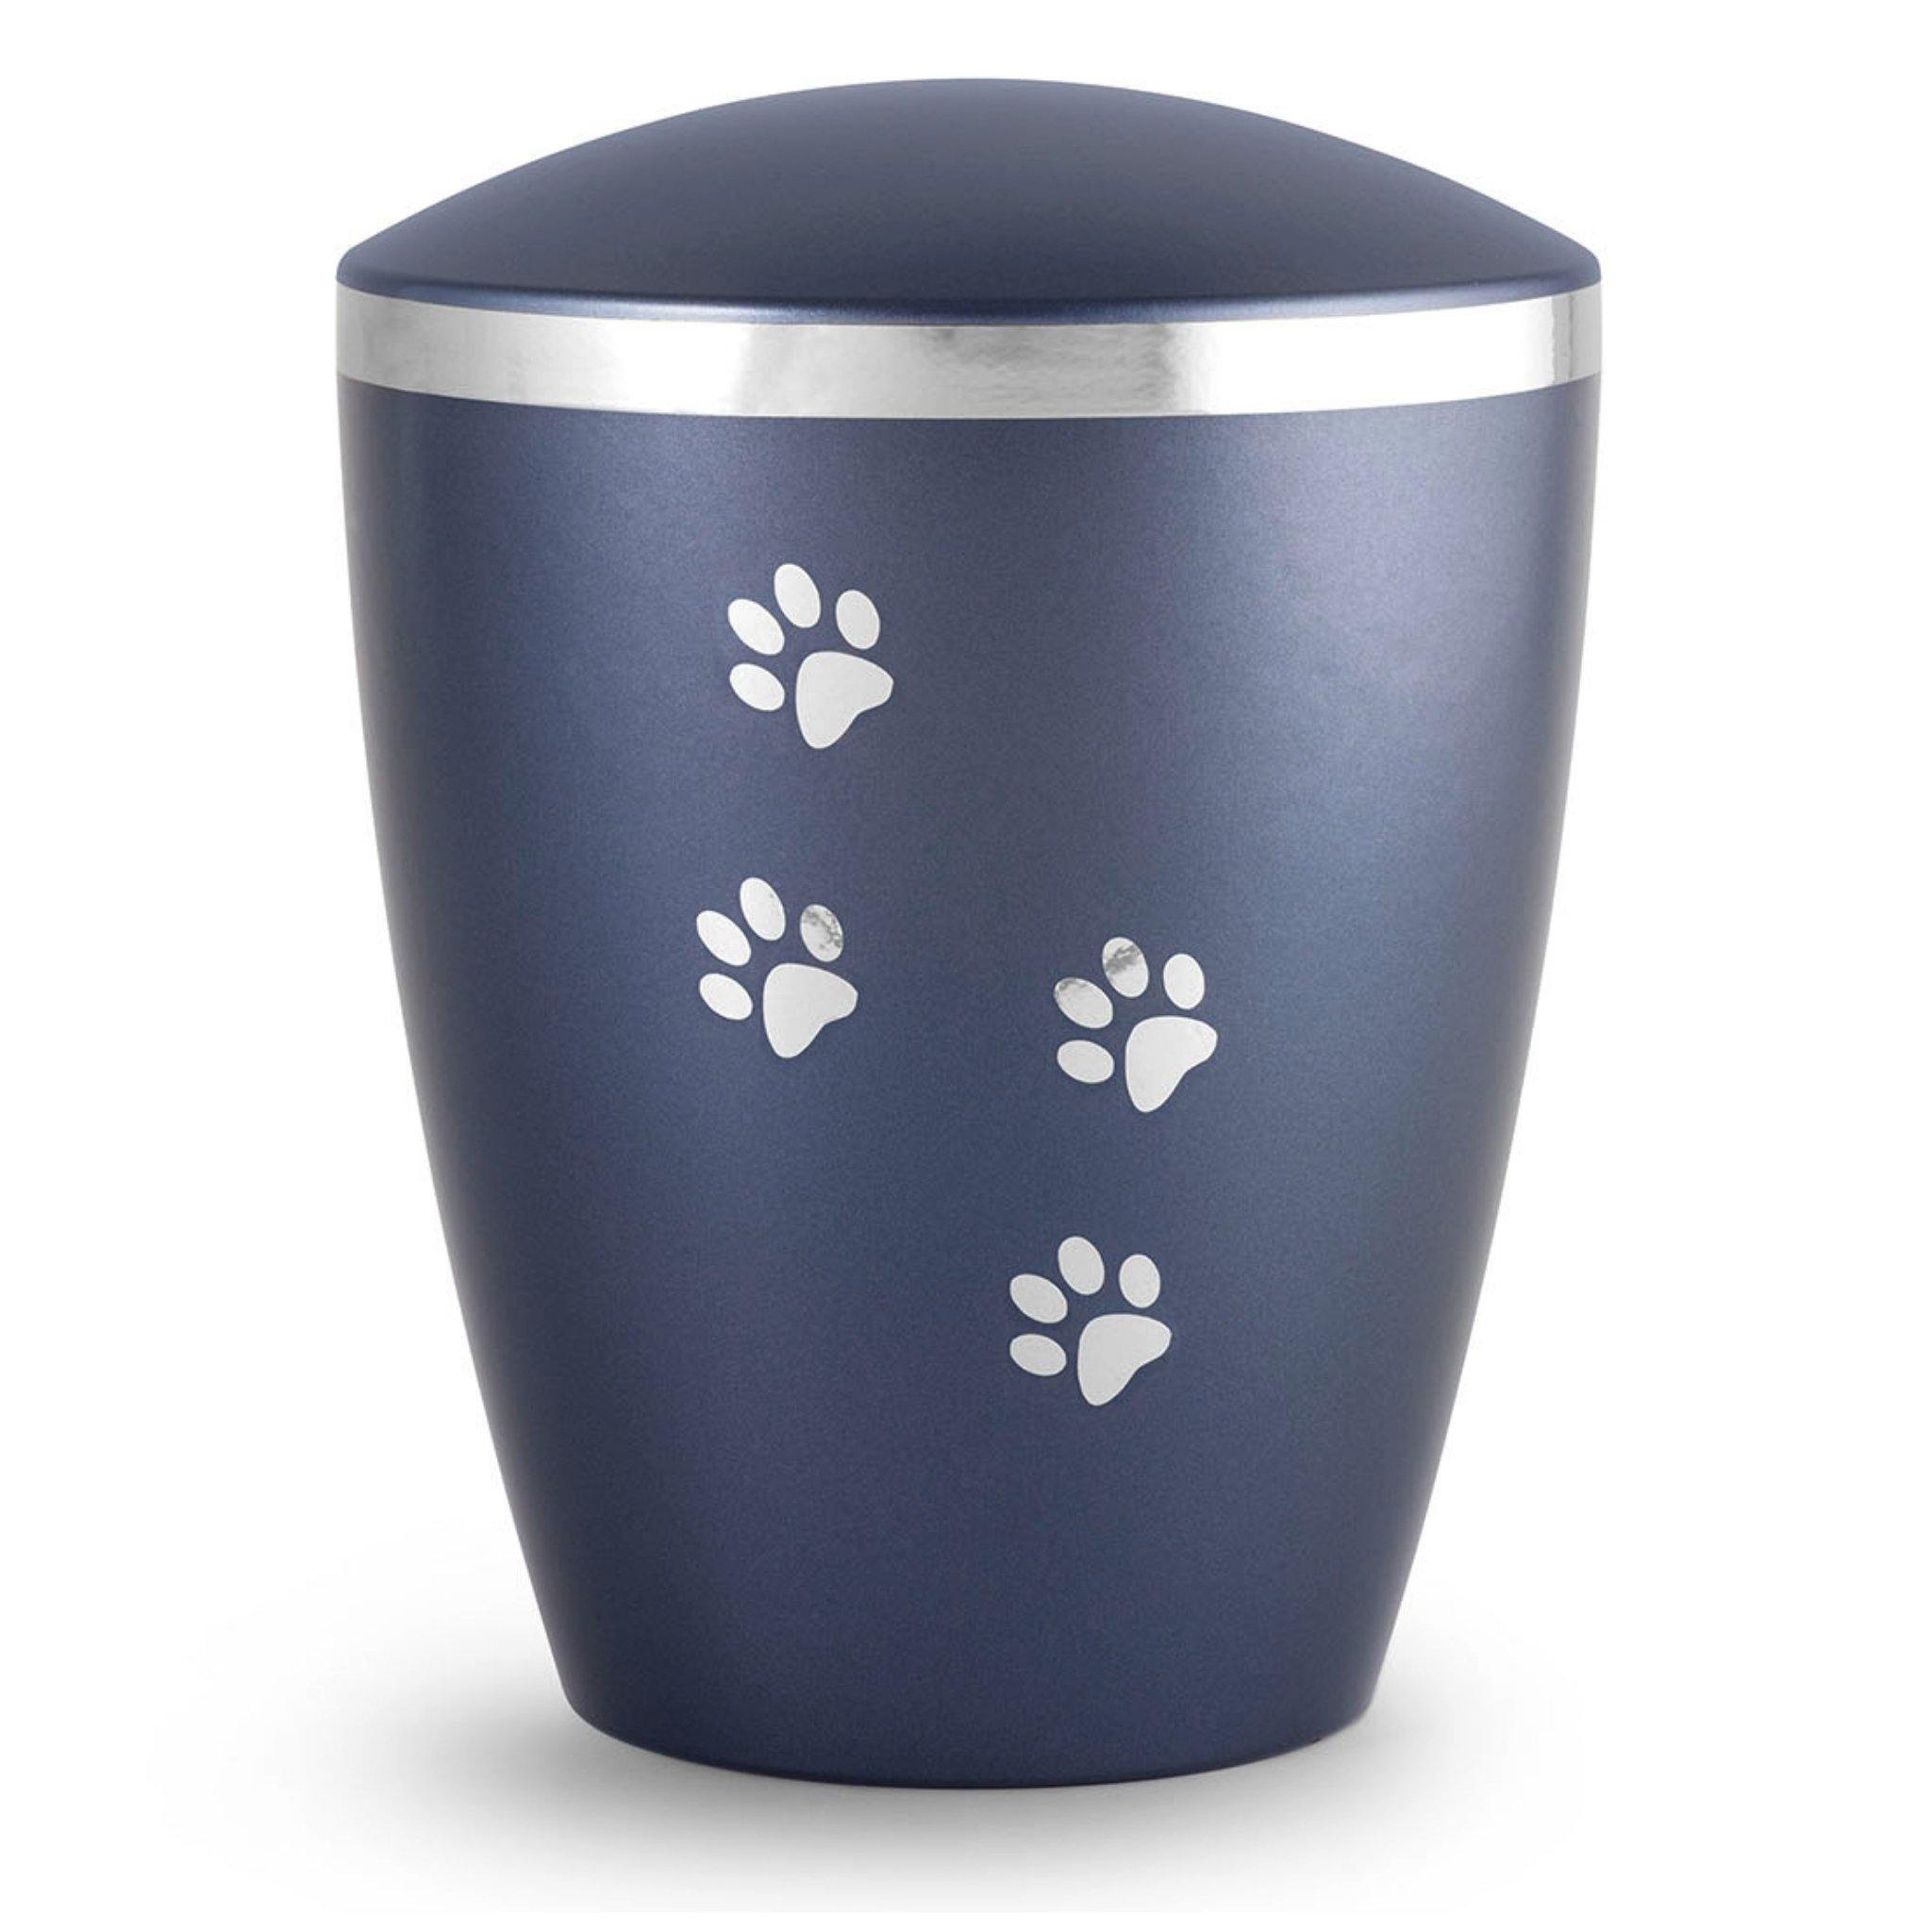 Otley Pawprints Biodegradable Cremation Ashes Urn VOL